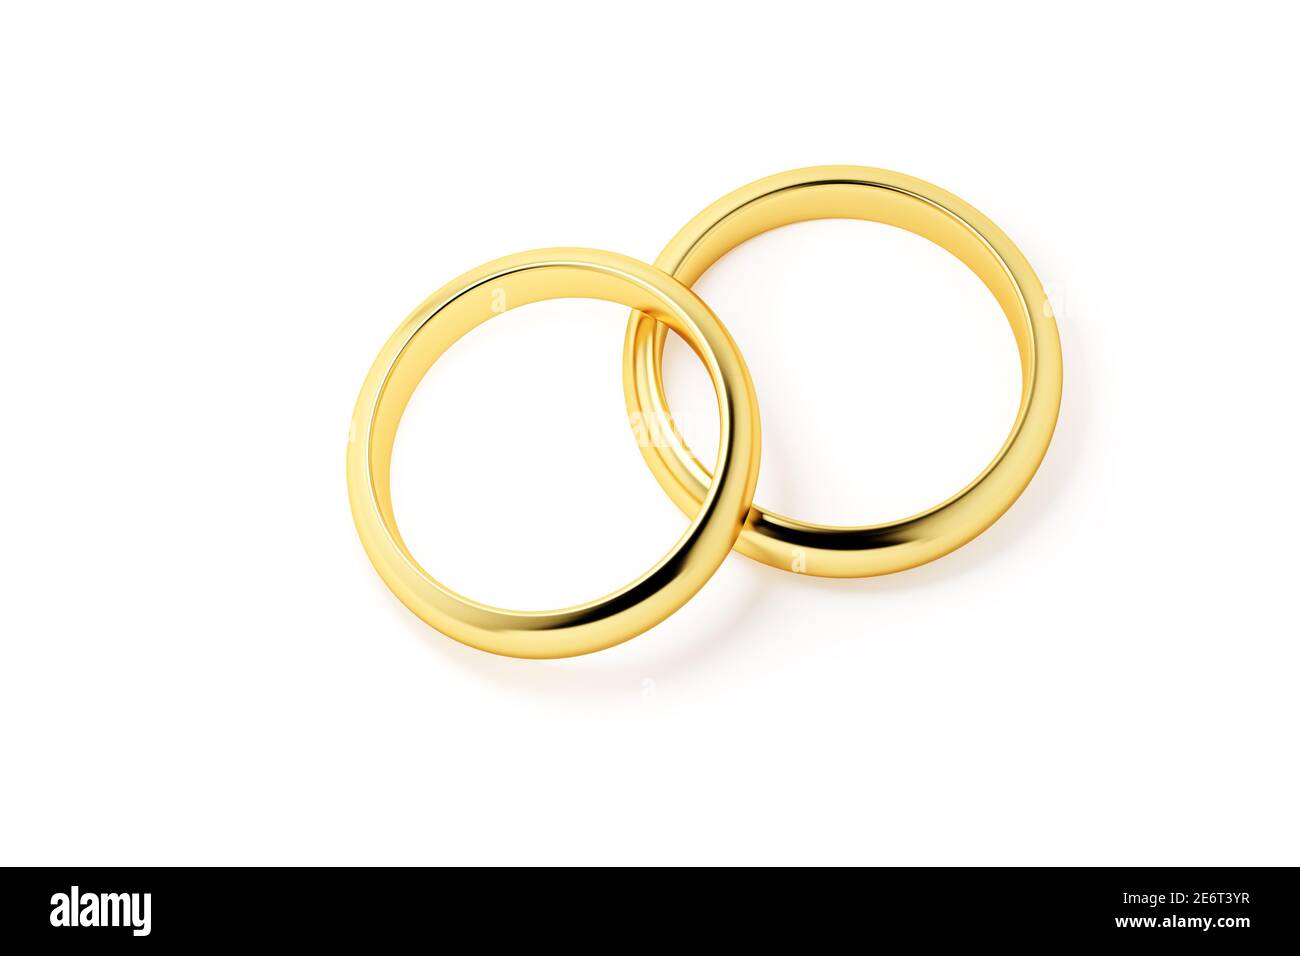 Two golden wedding rings isolated on a white background. Stock Photo